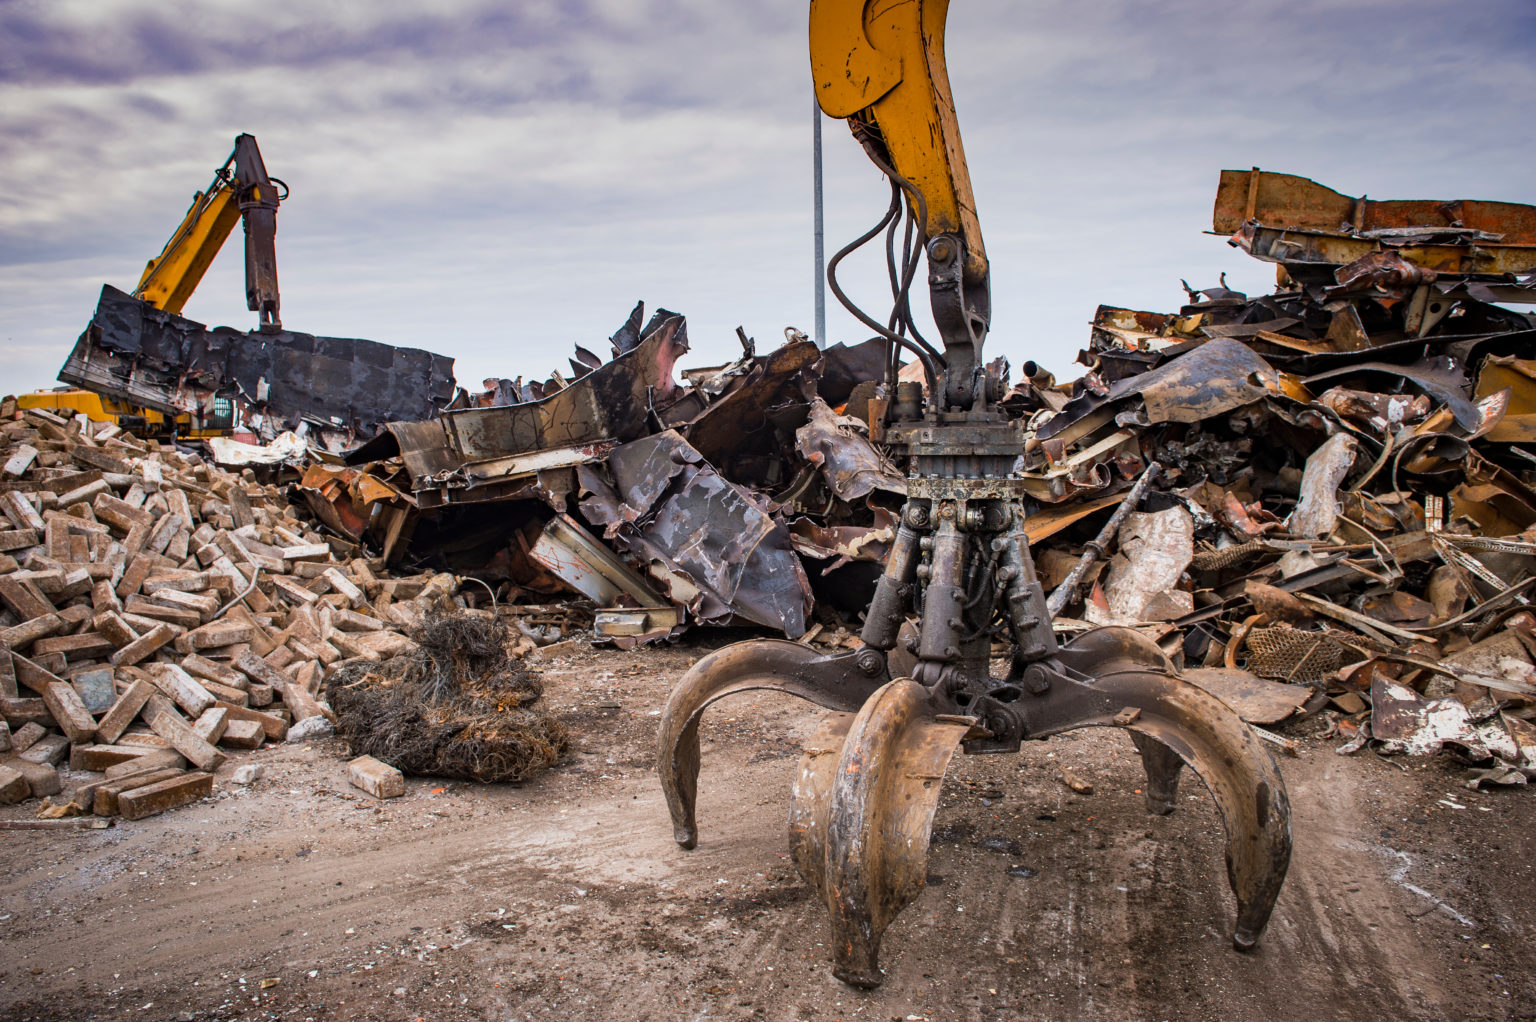 The Challenges of Recycling Scrap Metal